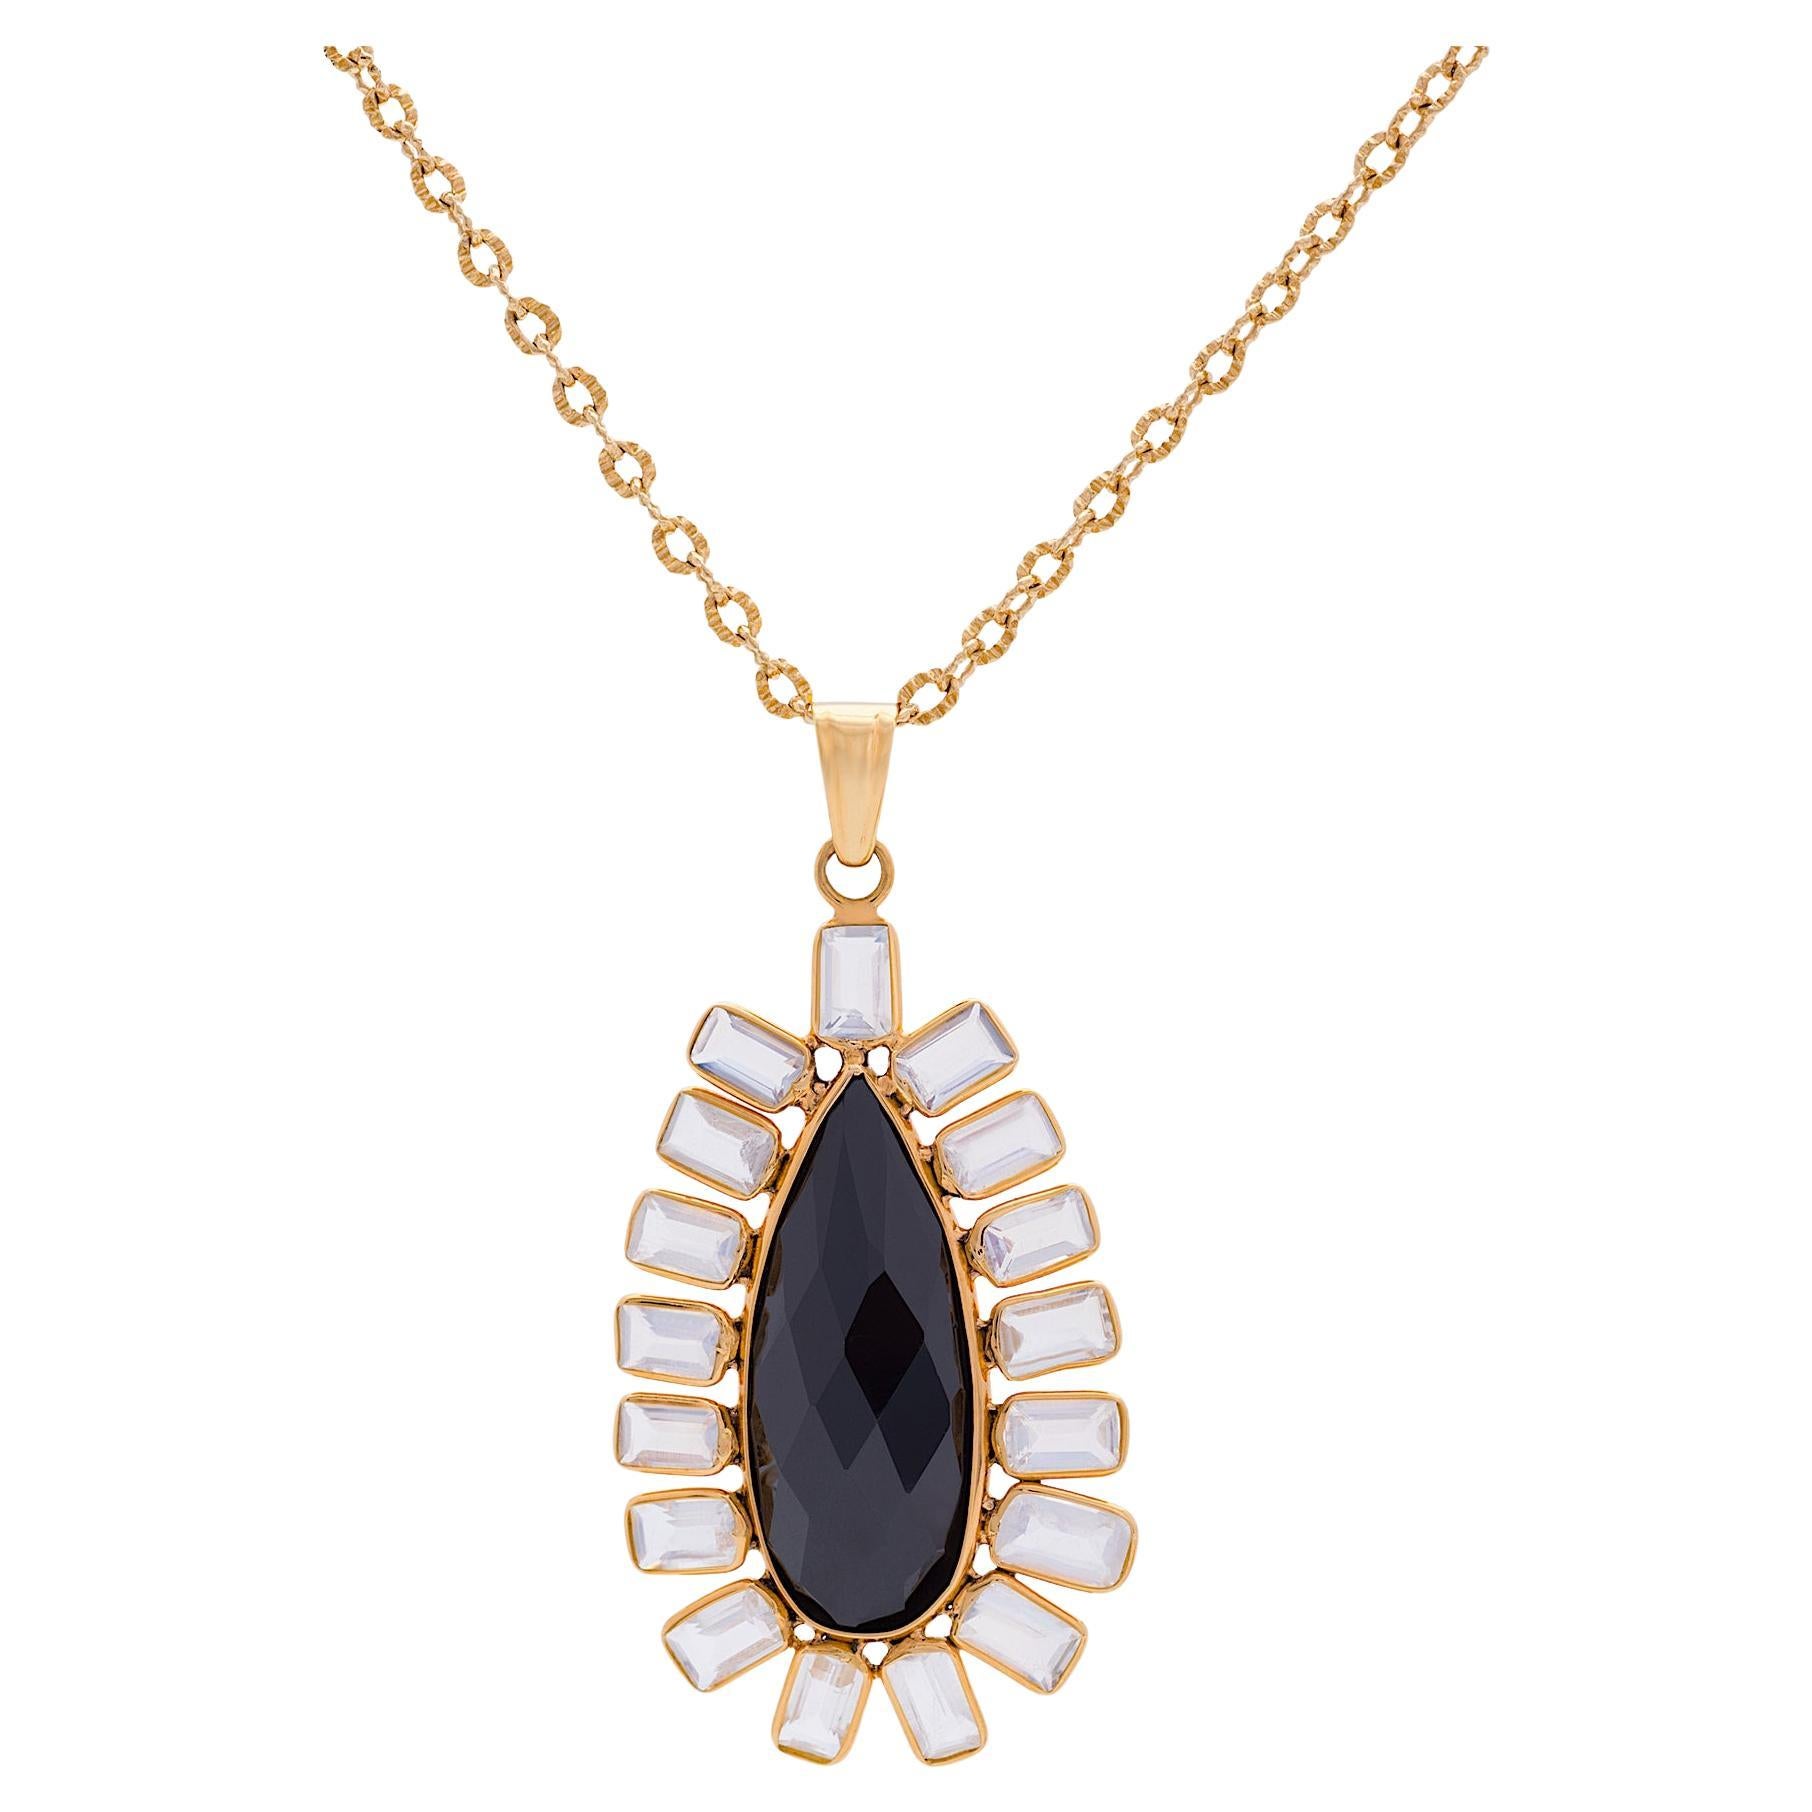 Black Spinal & Rainbow Moonstone Pendant In 18K Yellow Gold 